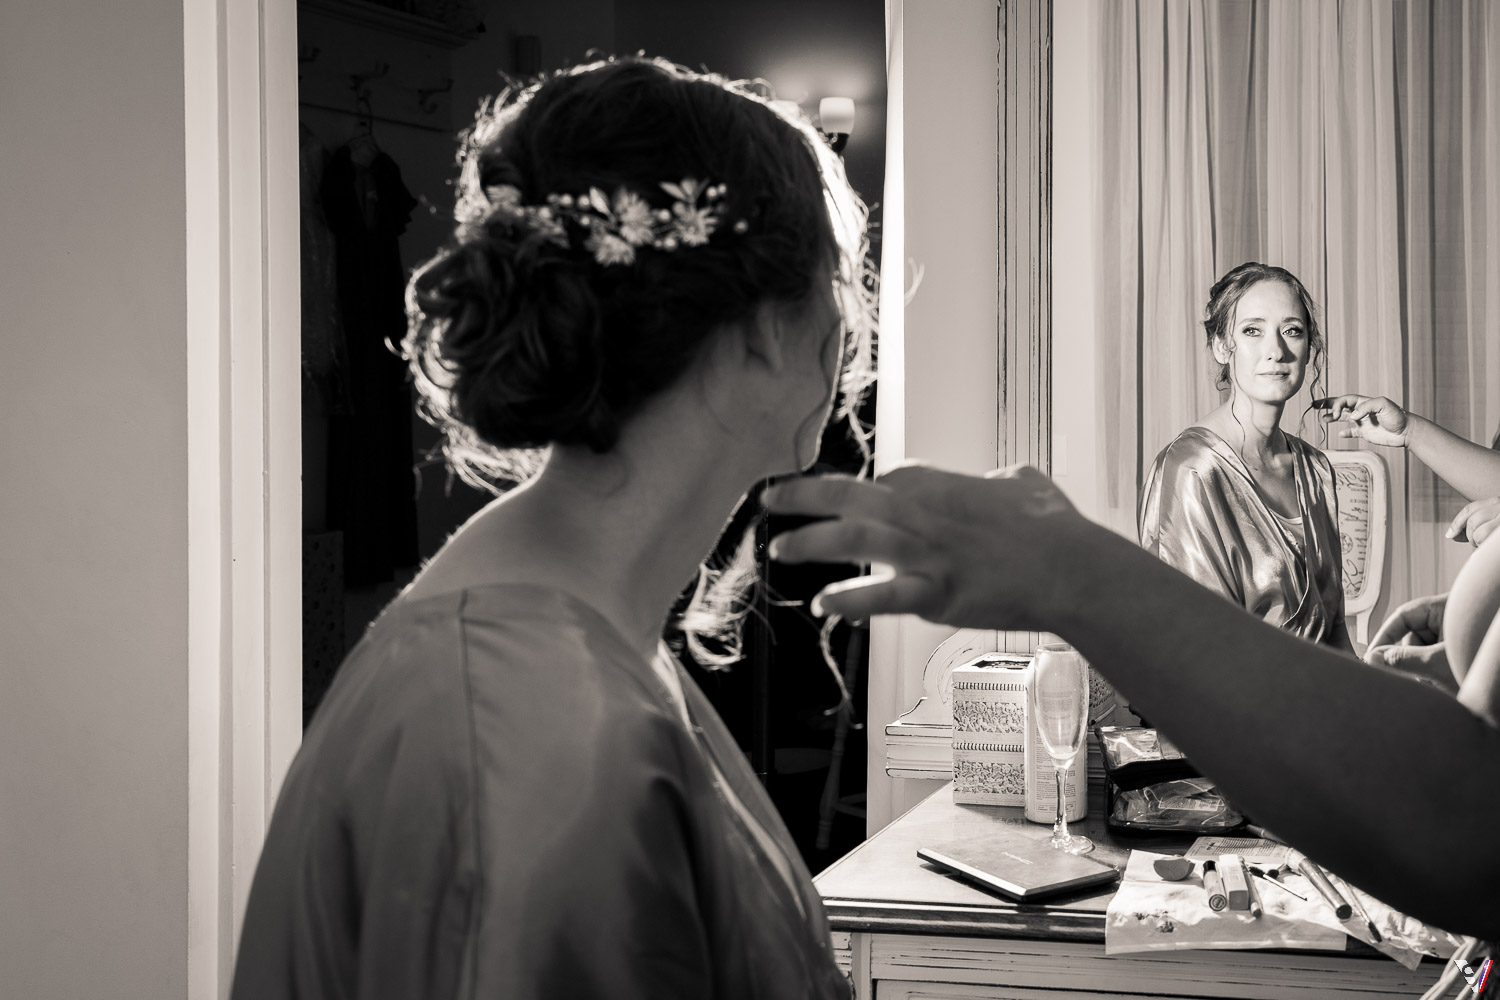 Getting ready bride photography make up